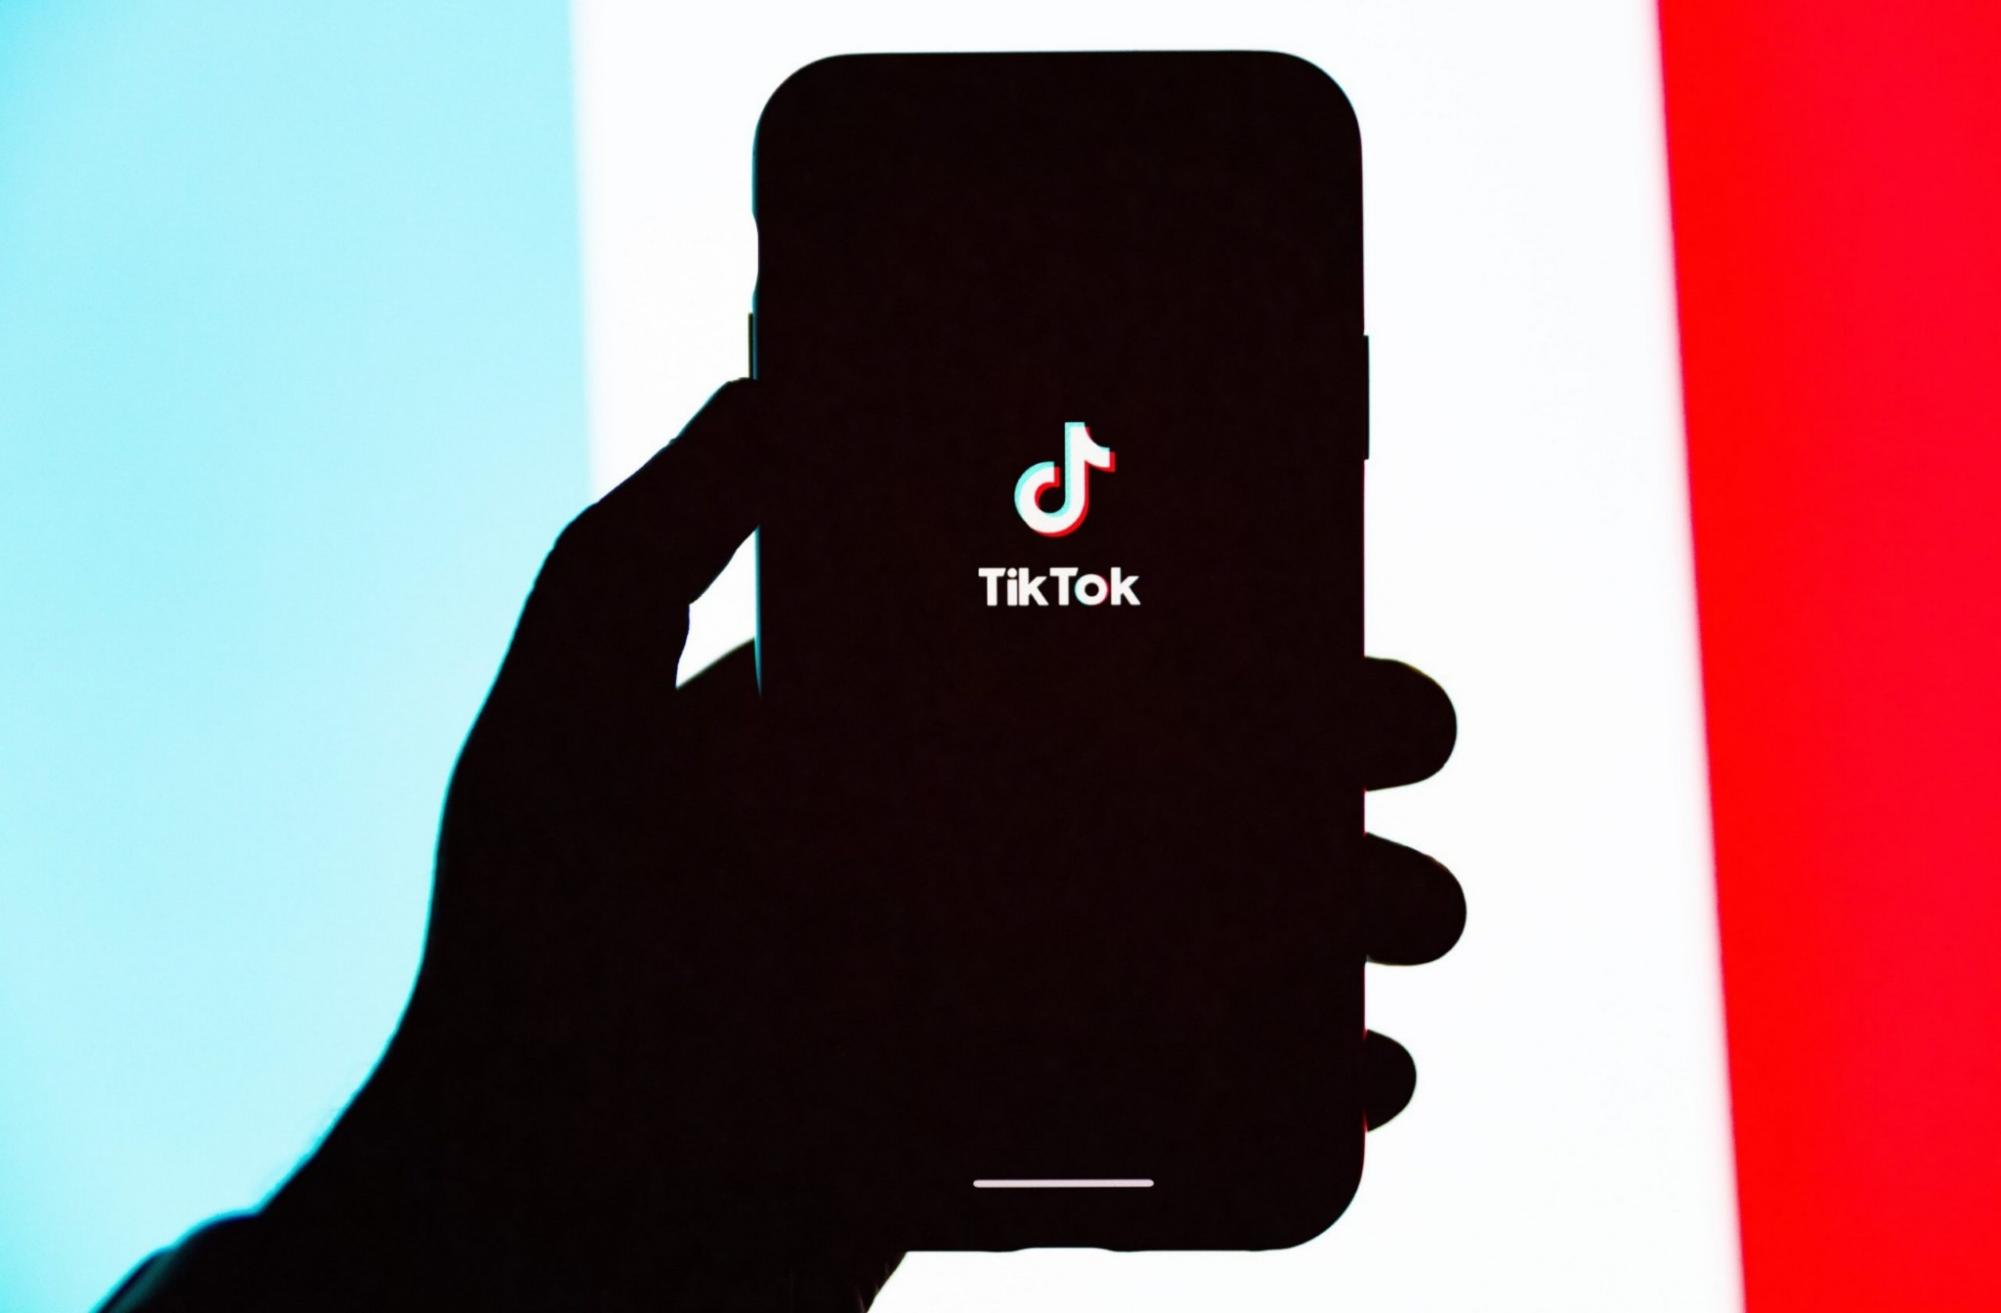 TikTok’s presence in pop culture and it’s heavy reliance on music to draw in users has had significant positive and negative effects on the music industry.